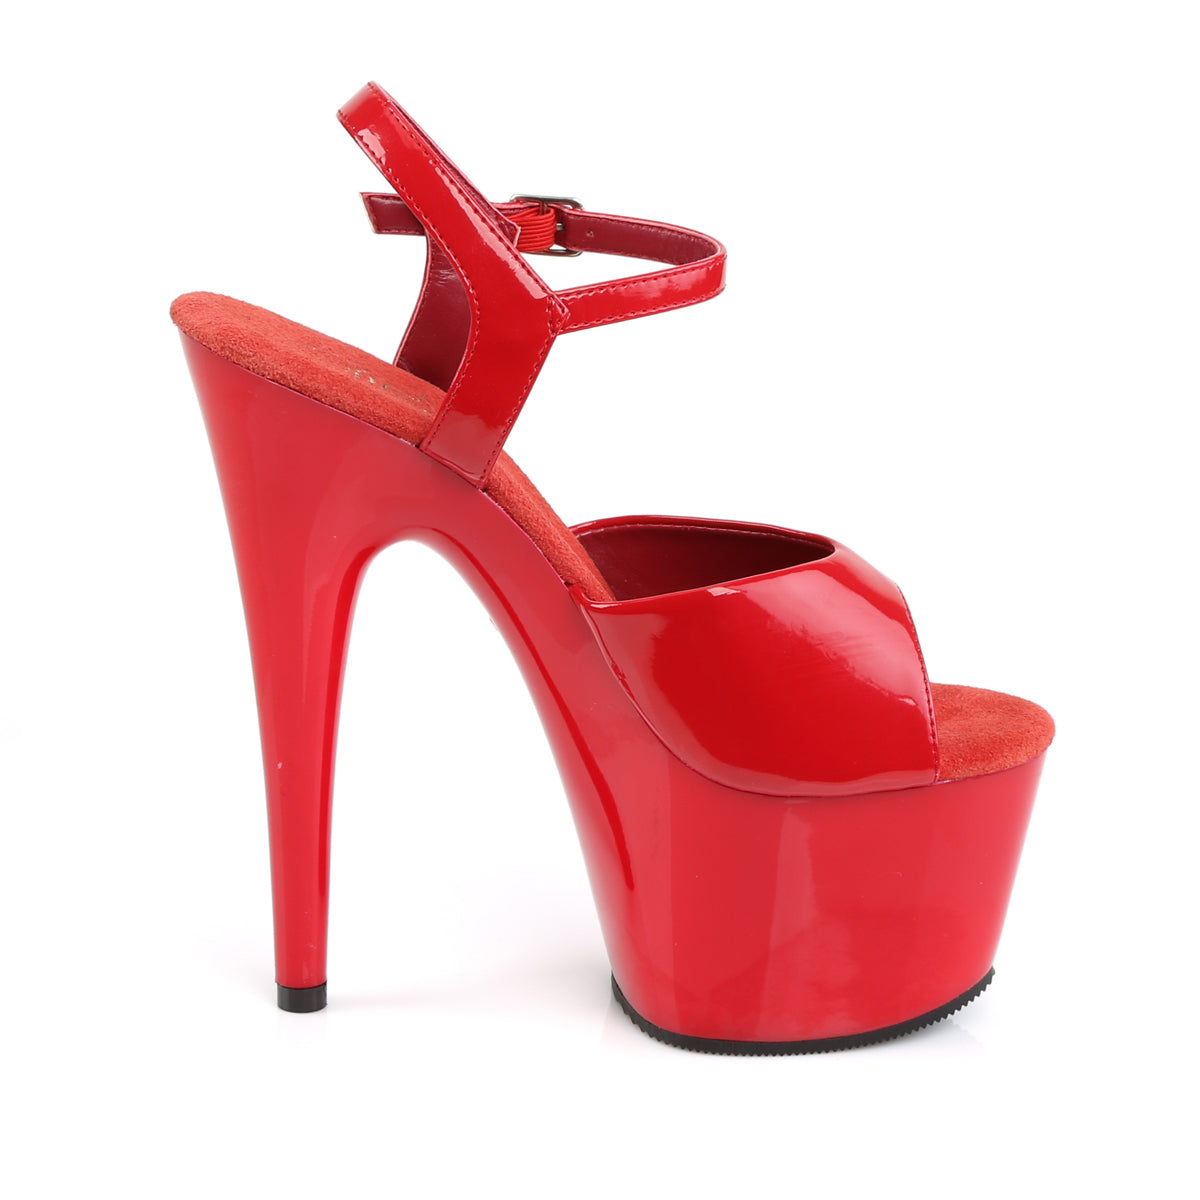 ADORE-709 Pleasers 7 Inch Heel Red Pole Dancing Platforms-Pleaser- Sexy Shoes Fetish Heels